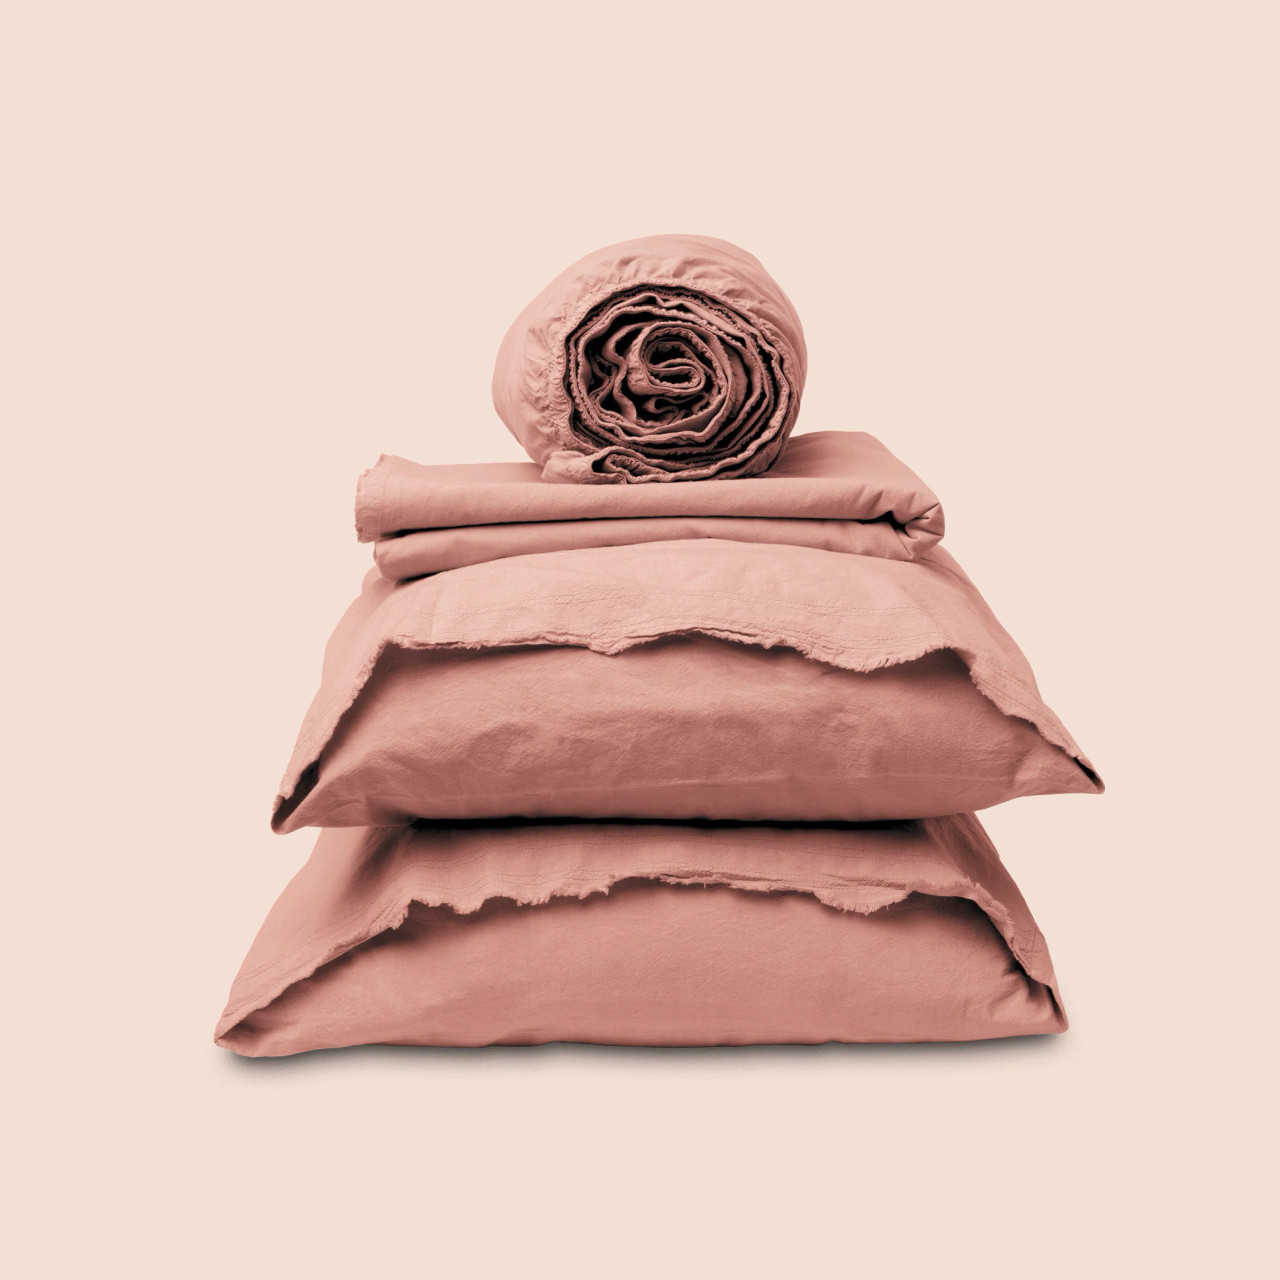 Dr. Weil Garment Washed Percale Bed Sheet Set by PureCare - Pink Sandstone Color Stacked